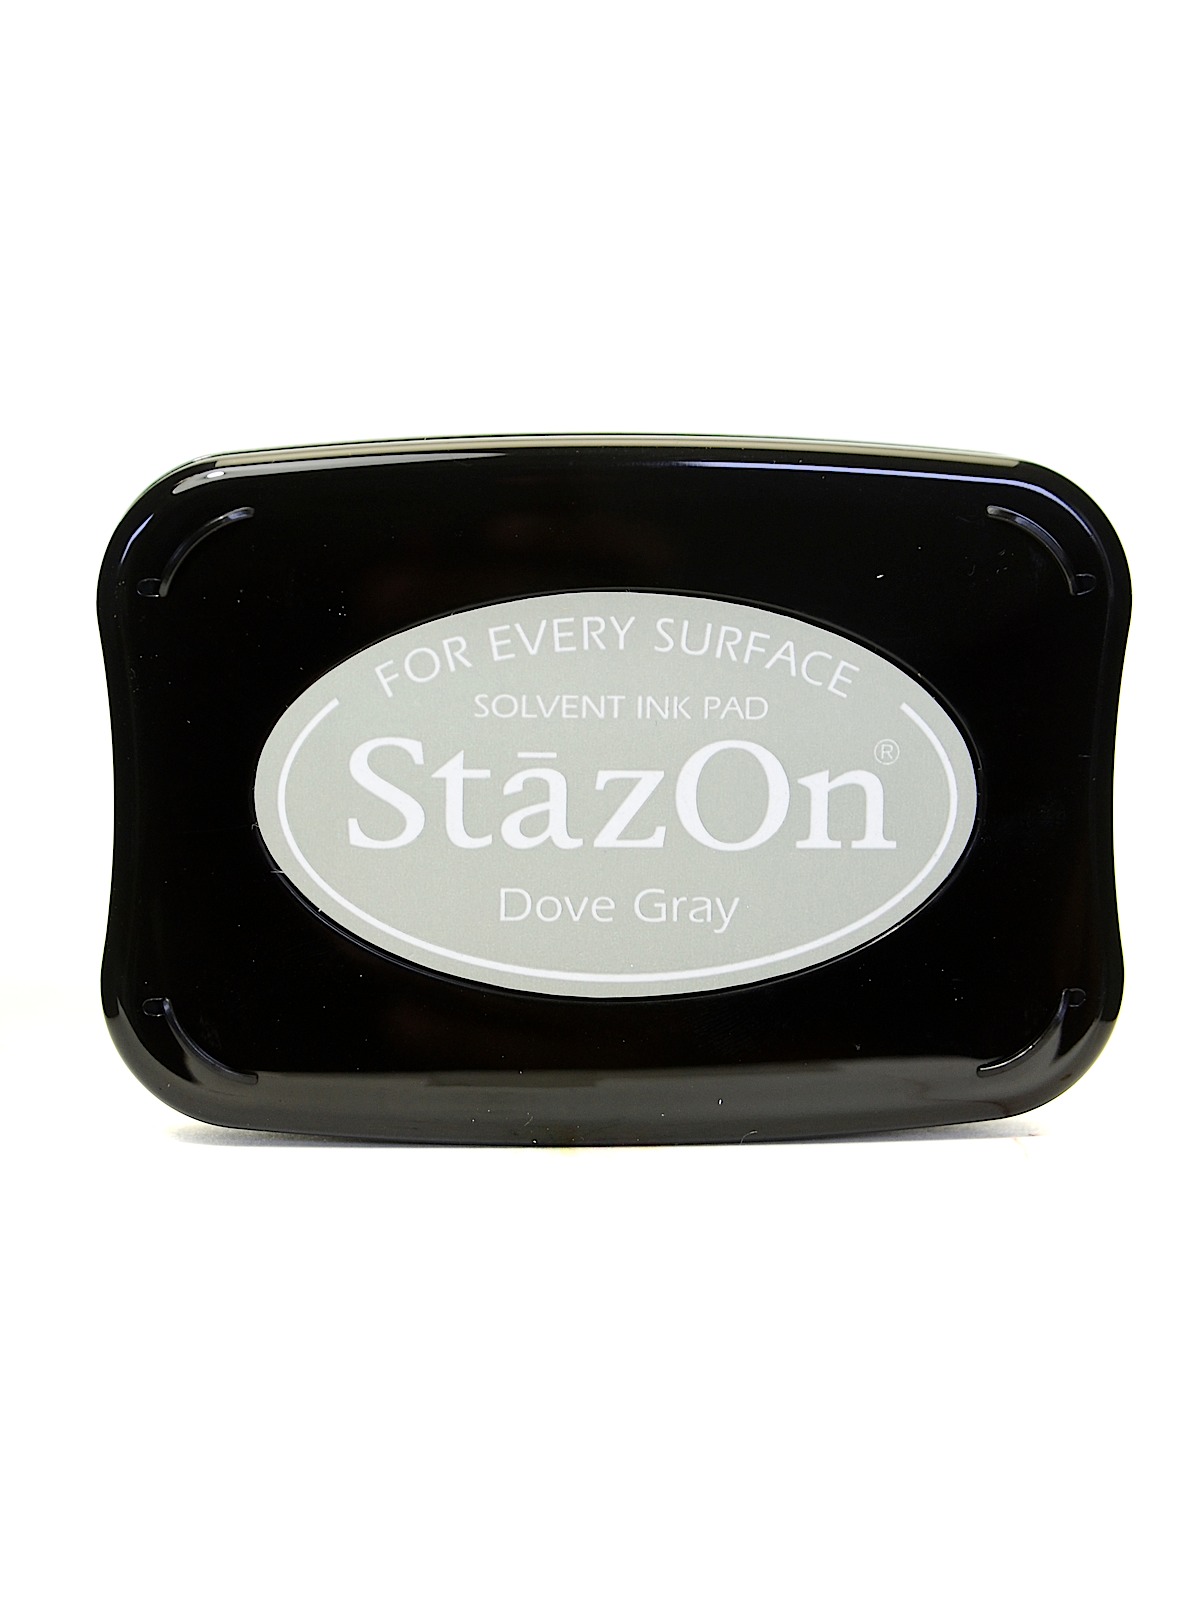 Stazon Solvent Ink Dove Gray 3.75 In. X 2.625 In. Full-size Pad